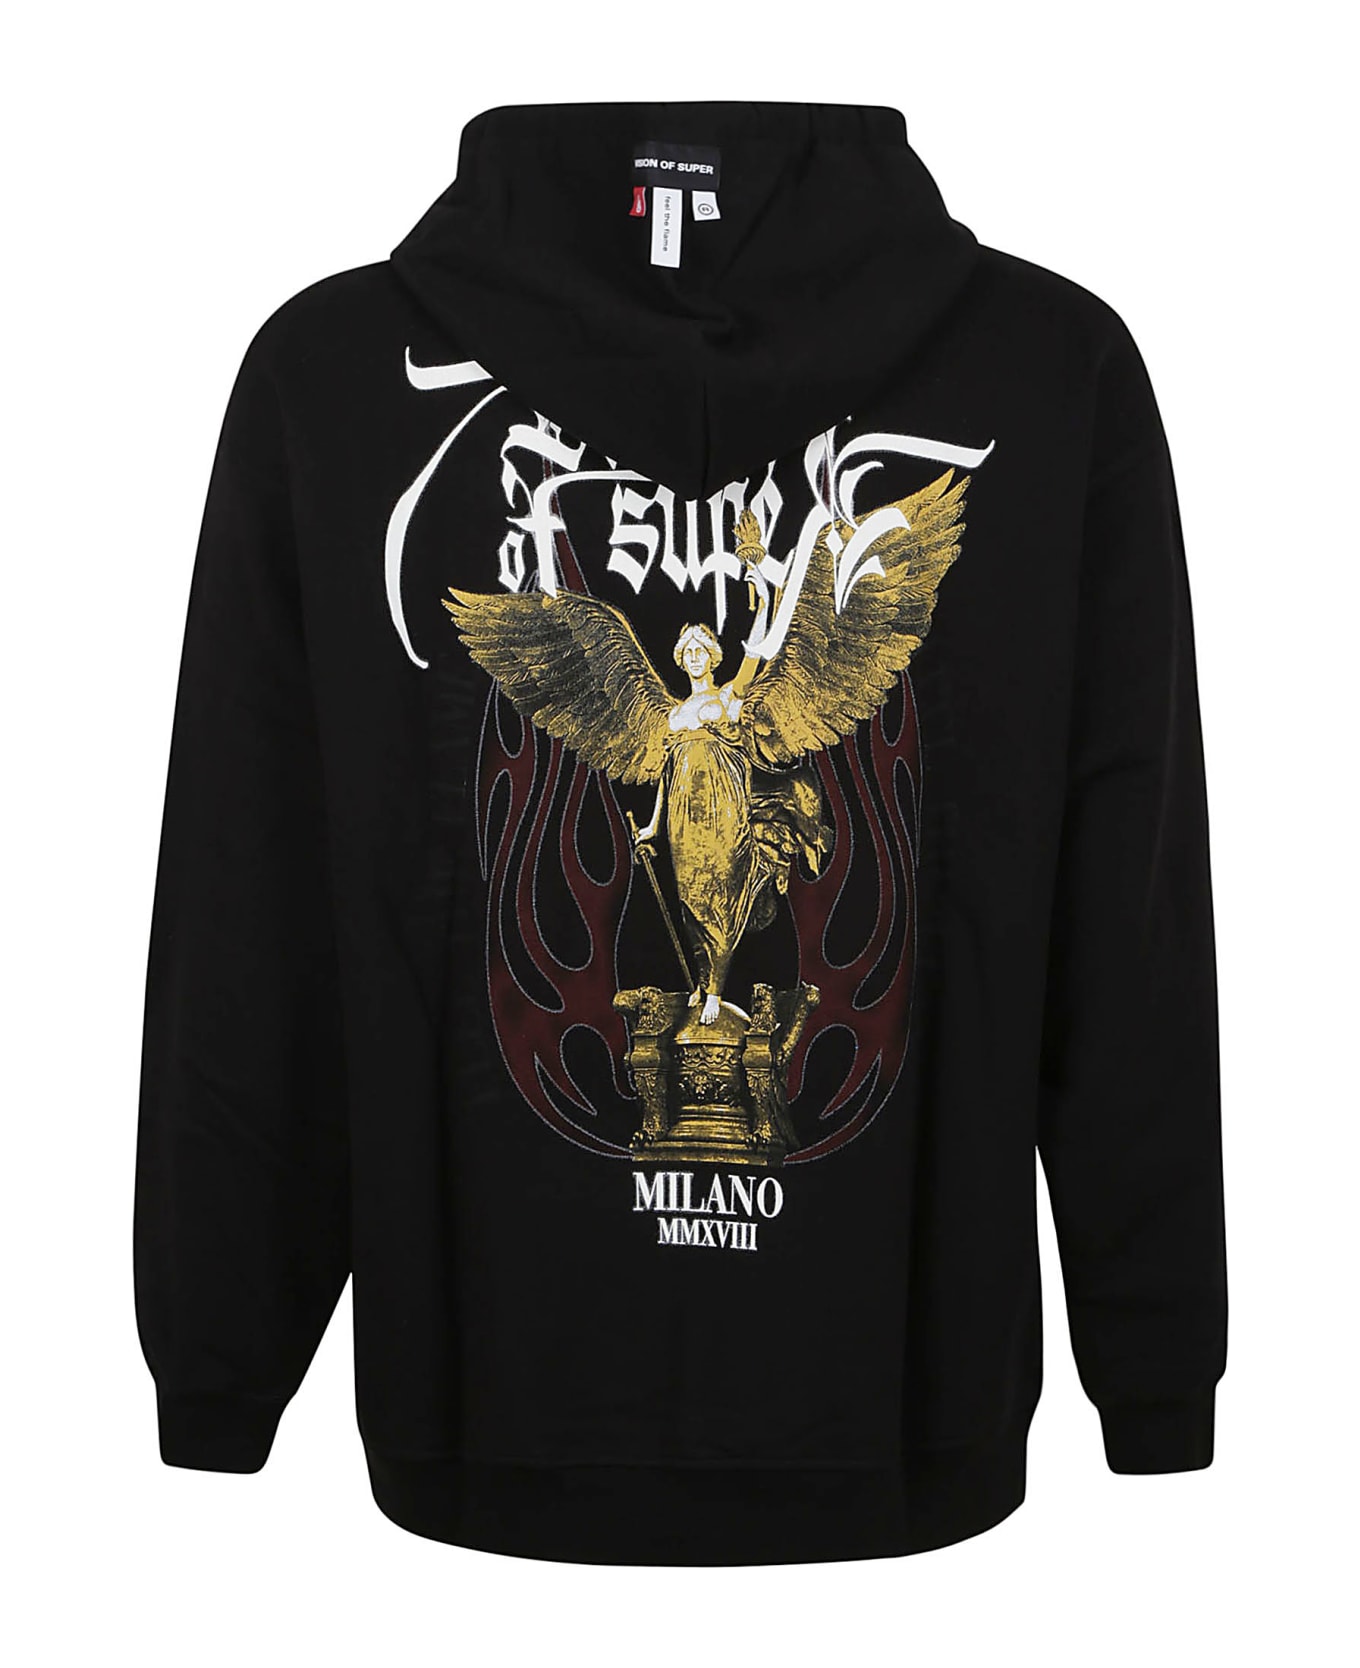 Vision of Super Black Hoodie With Rock Mather Print - Black